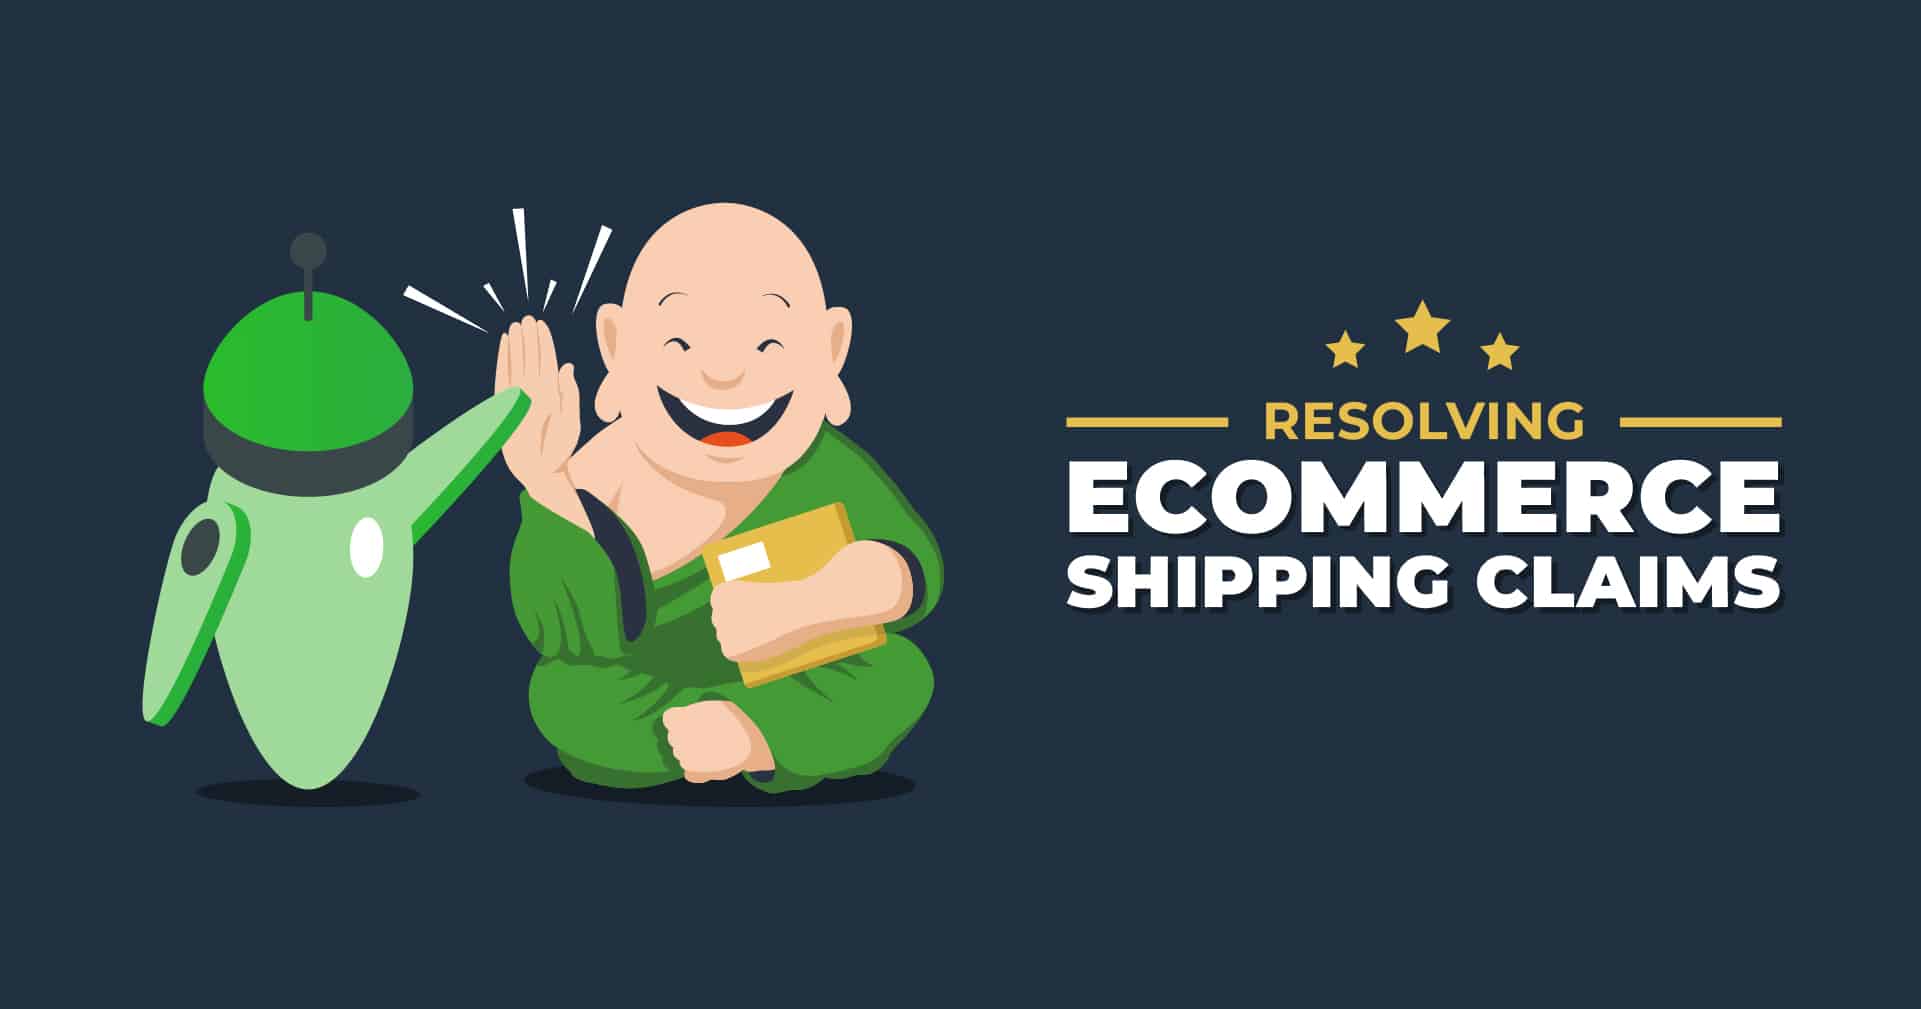 Resolving Ecommerce Shipping Claims